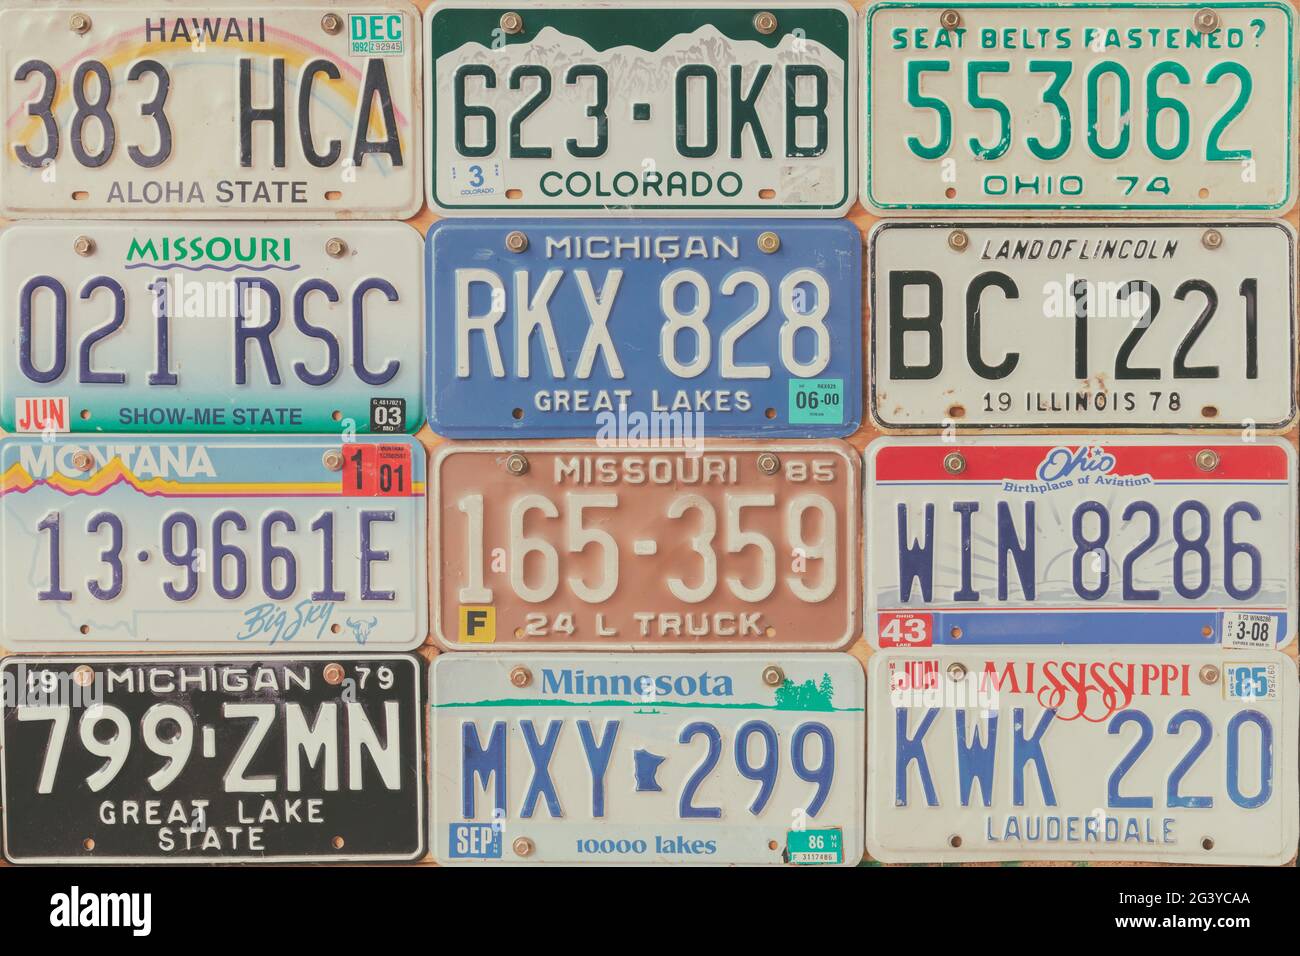 Drempt, The Netherlands - September 5, 2019: Retro styled image of old car license plates on a wall in Drempt, The Netherlands. Stock Photo